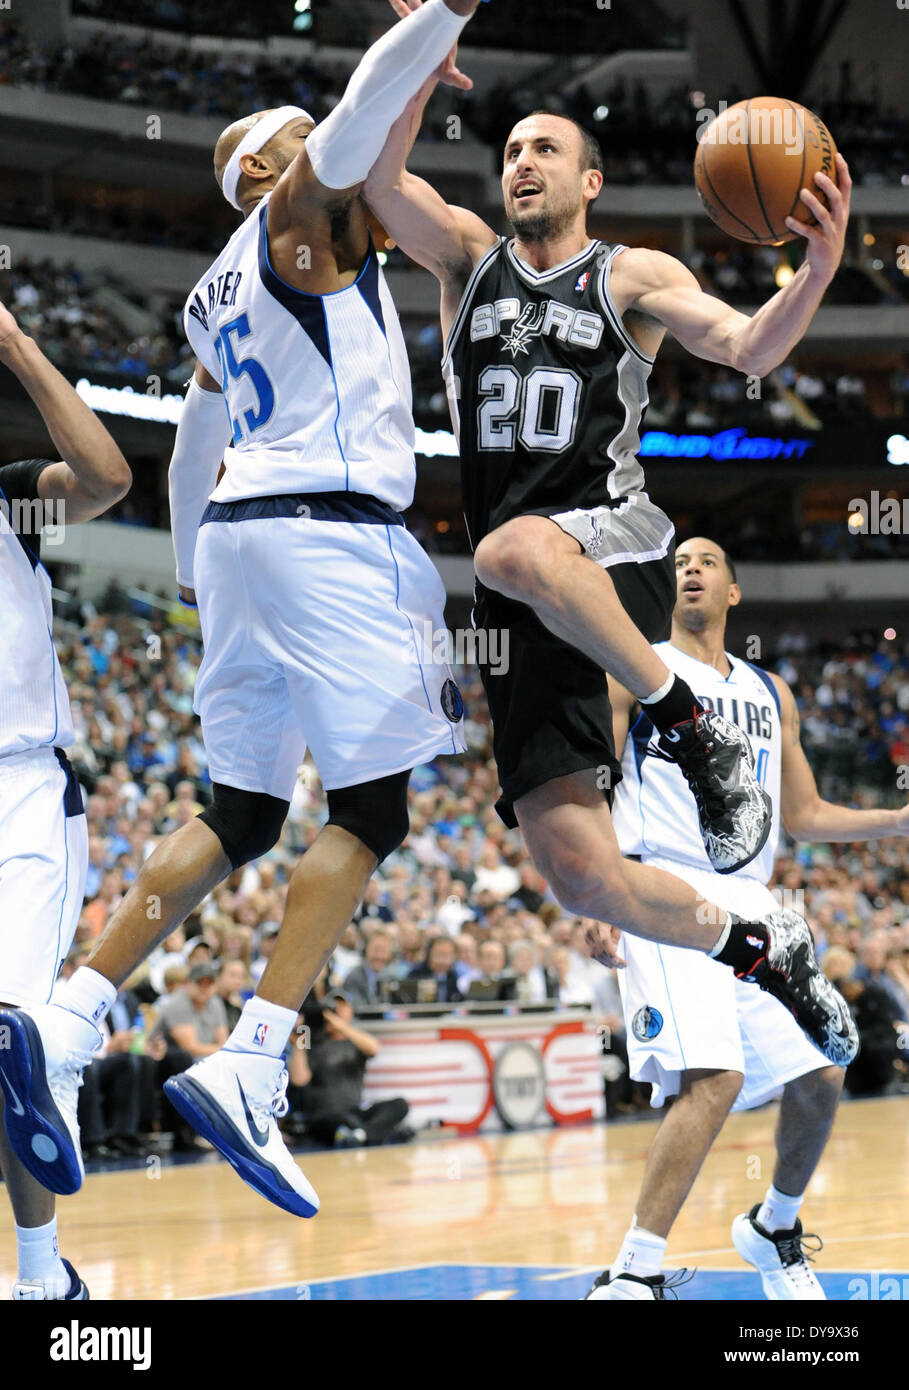 Apr 10, 2014: San Antonio Spurs guard Manu Ginobili #20 during an NBA game between the San Antonio Spurs and the Dallas Mavericks at the American Airlines Center in Dallas, TX San Antonio defeated Dallas 109-100 Stock Photo